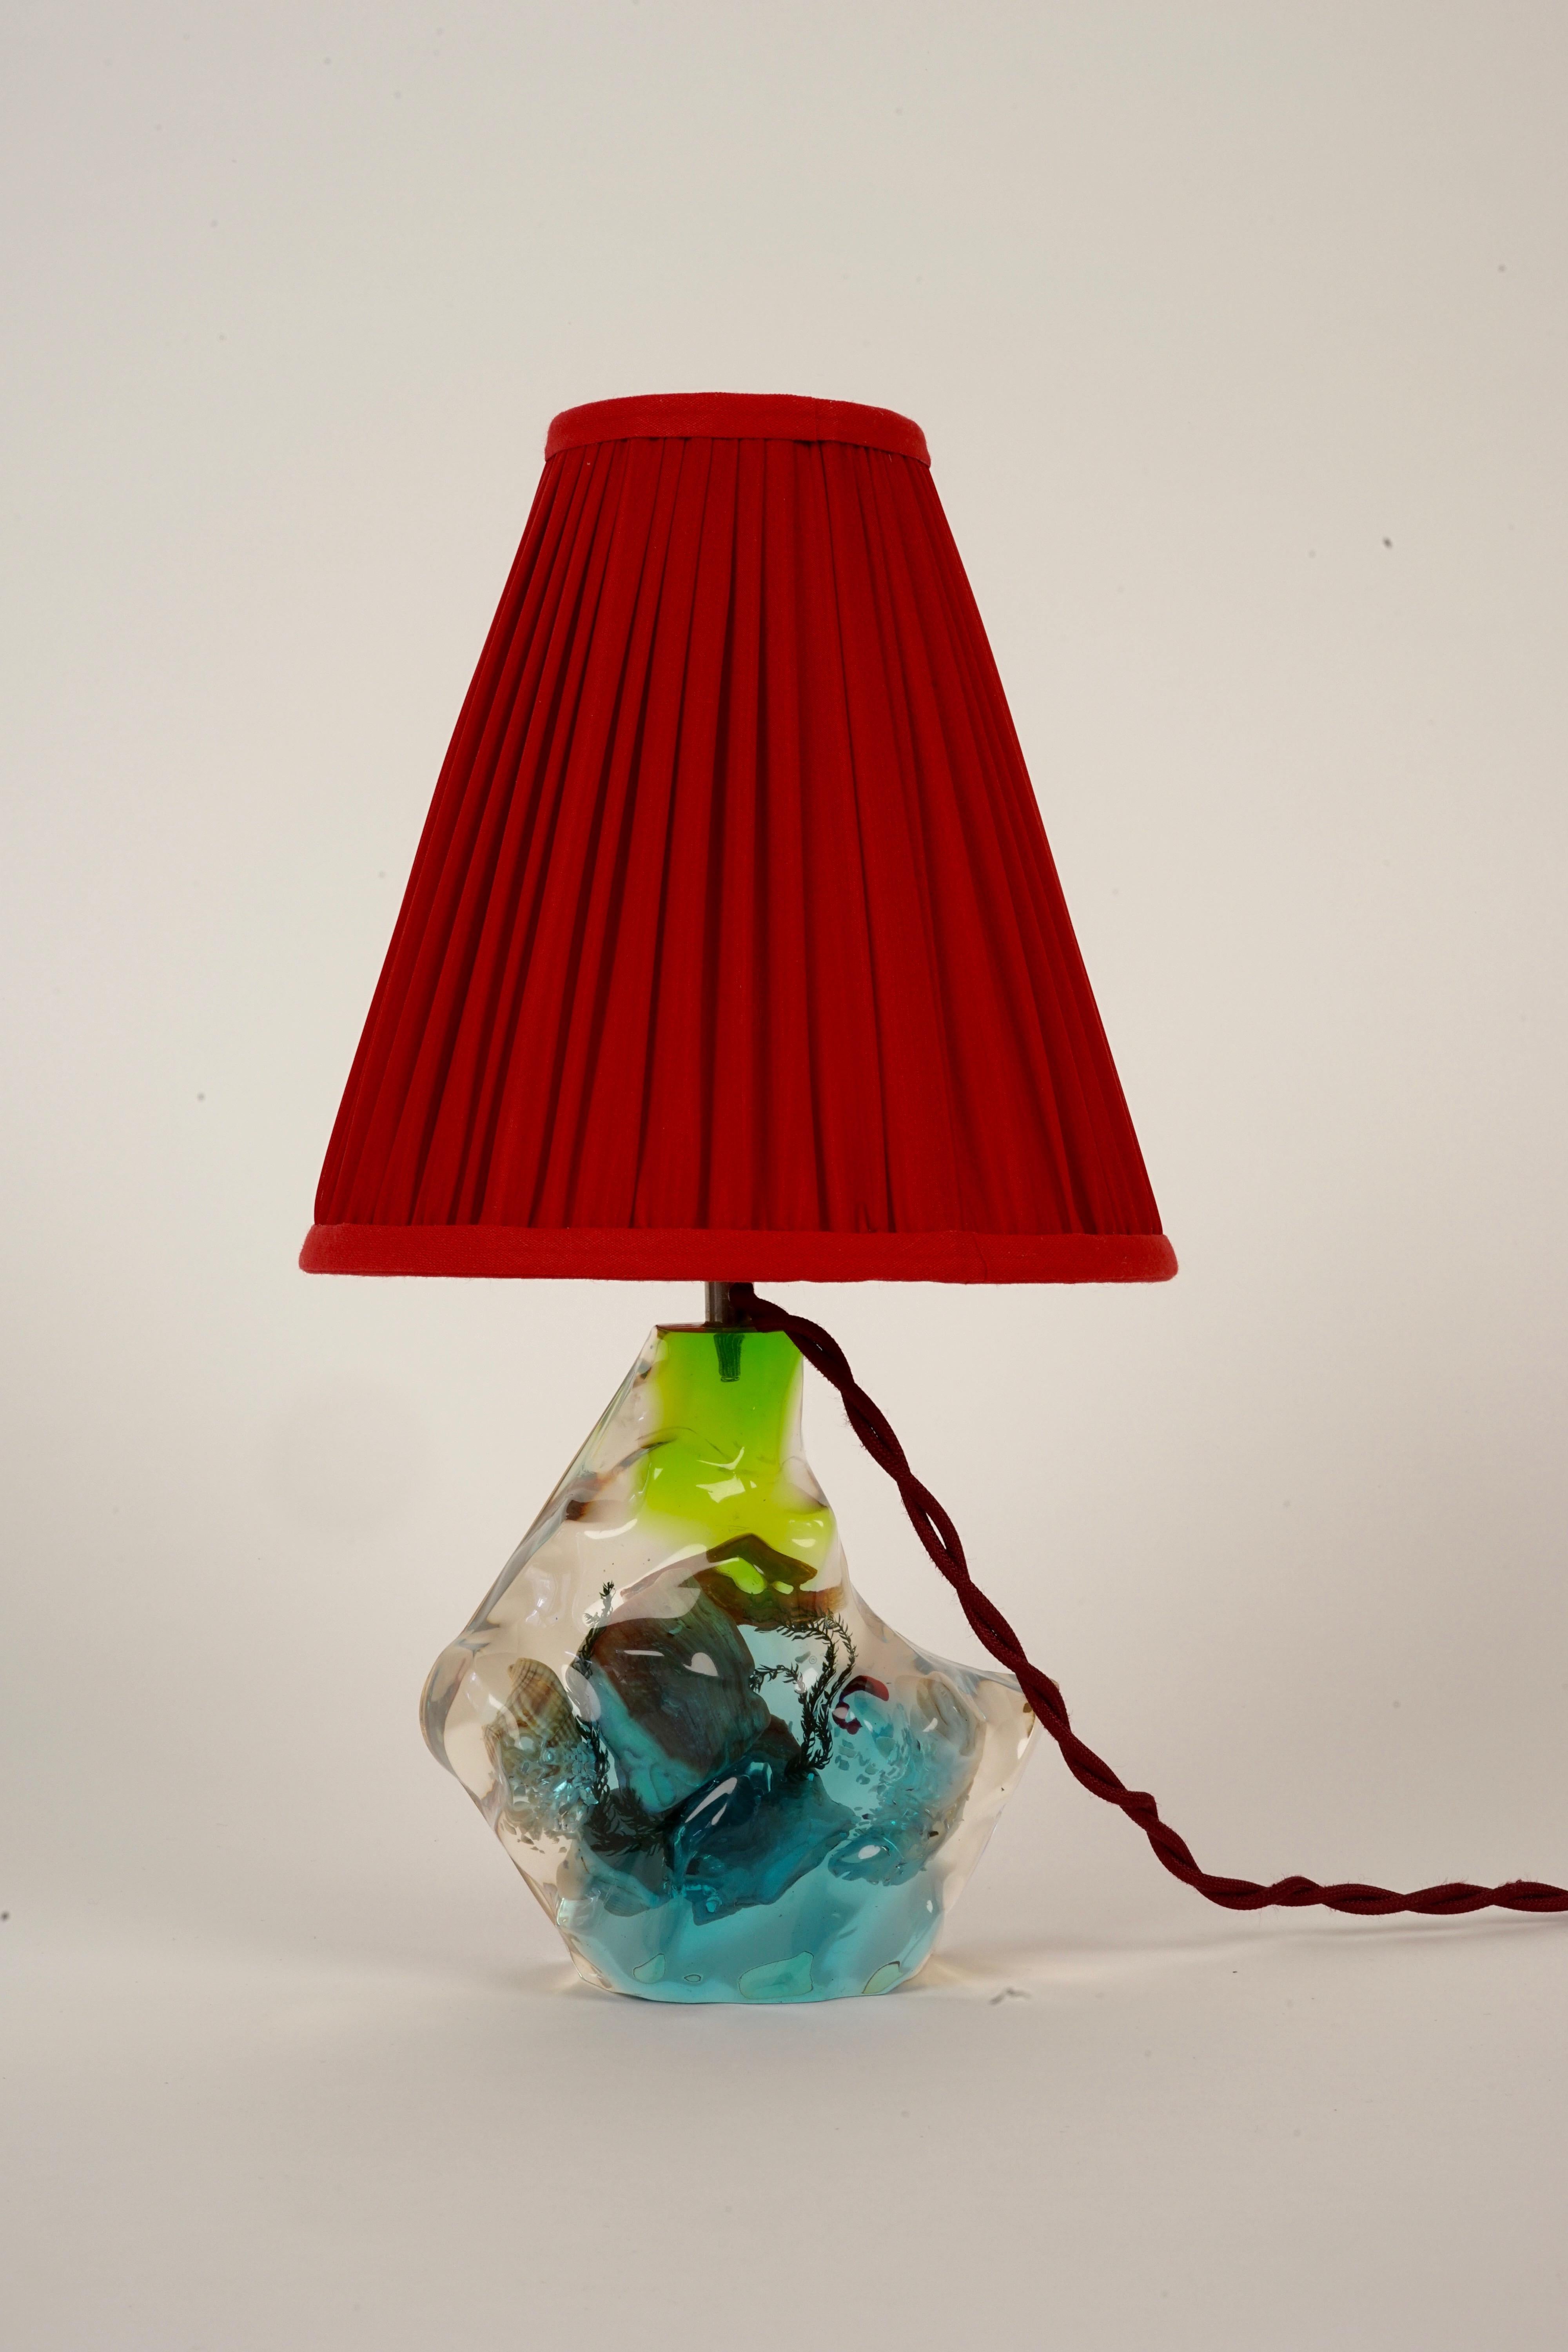 A small table lamp made from cast acrylic with real shells, star fish, sea weed and a fish.
The acrylic is blue and green colored with a red silk pleated shade. Cast acrylic lamps were in vogue in the 1950's. The textile cable has the beautifully